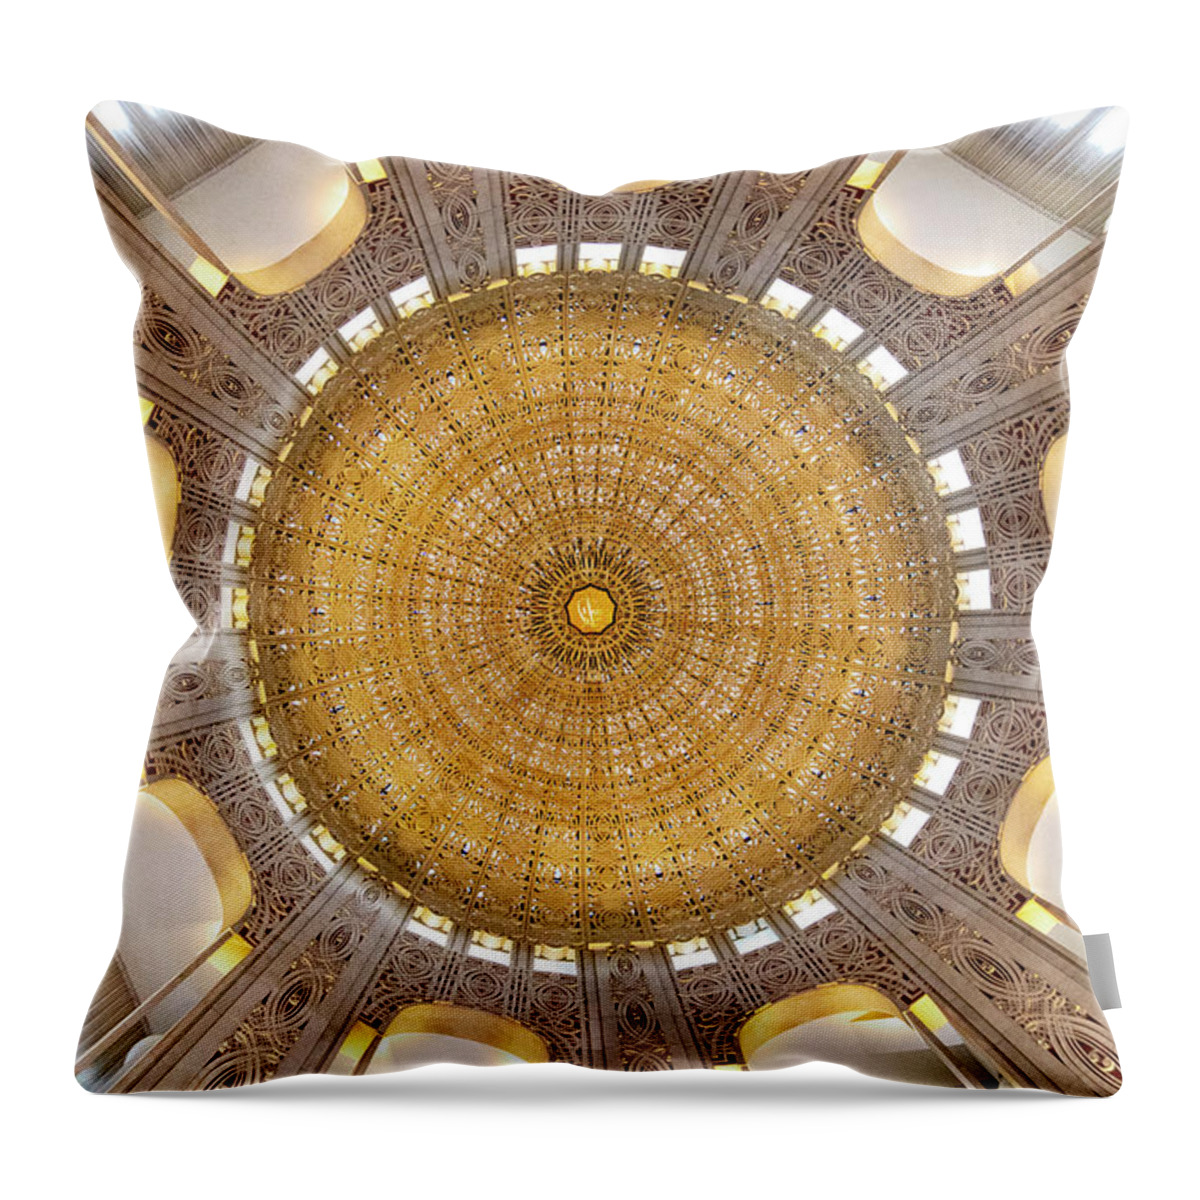 Bahai Temple Dome Throw Pillow featuring the photograph Bahai Temple Dome by Patty Colabuono